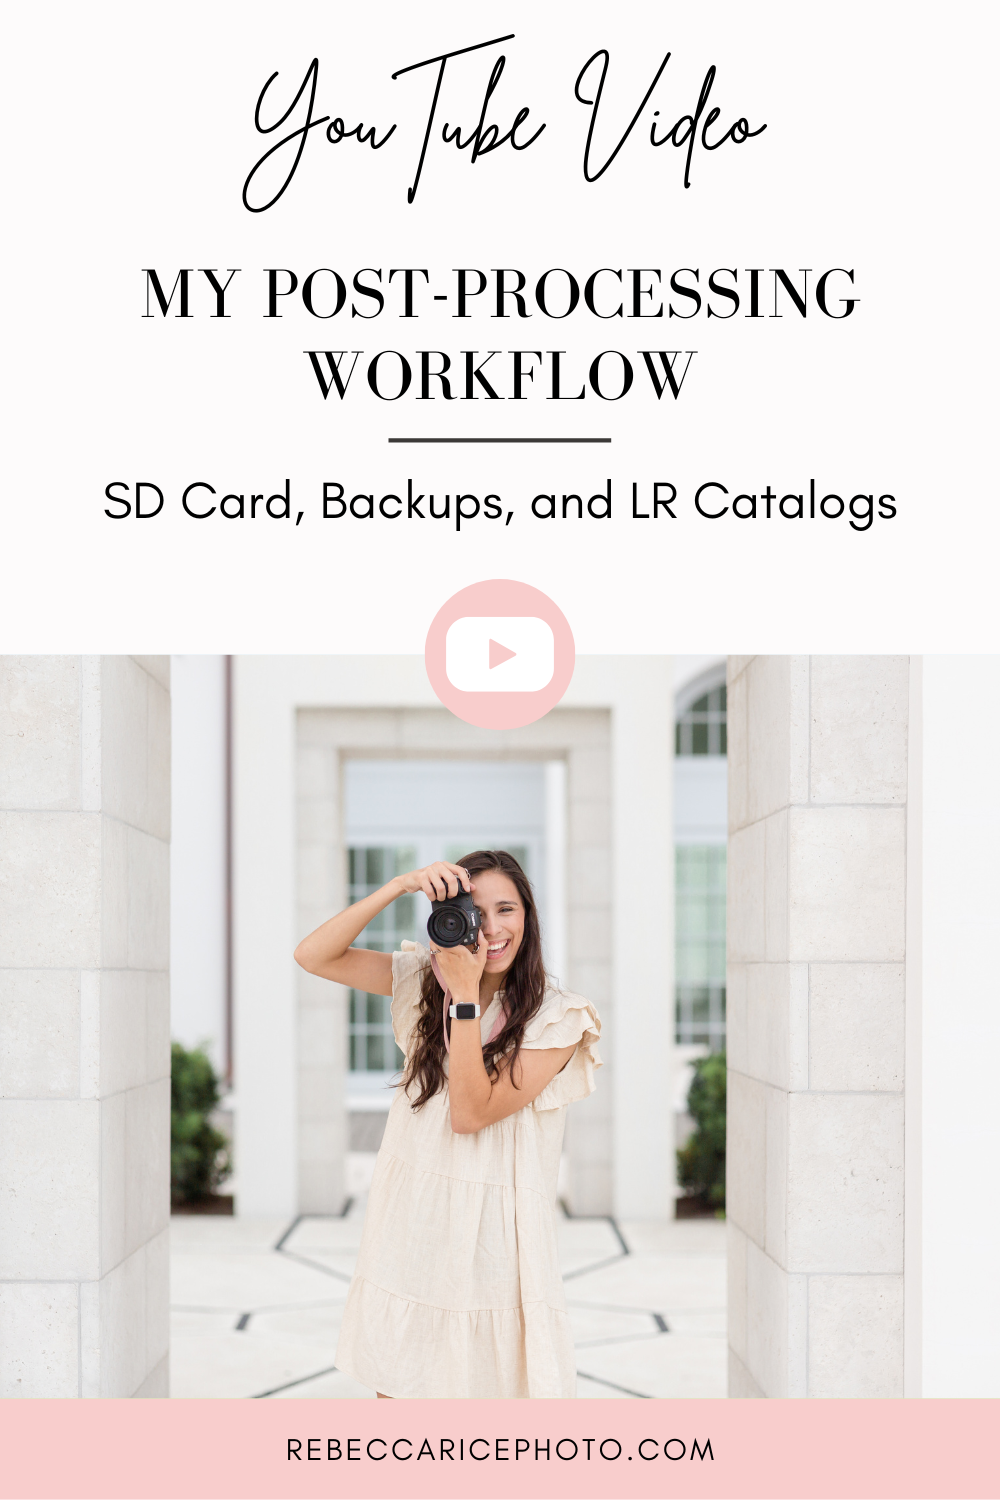 My Post-Processing Workflow: SD Cards, Backups, and LR Catalogs